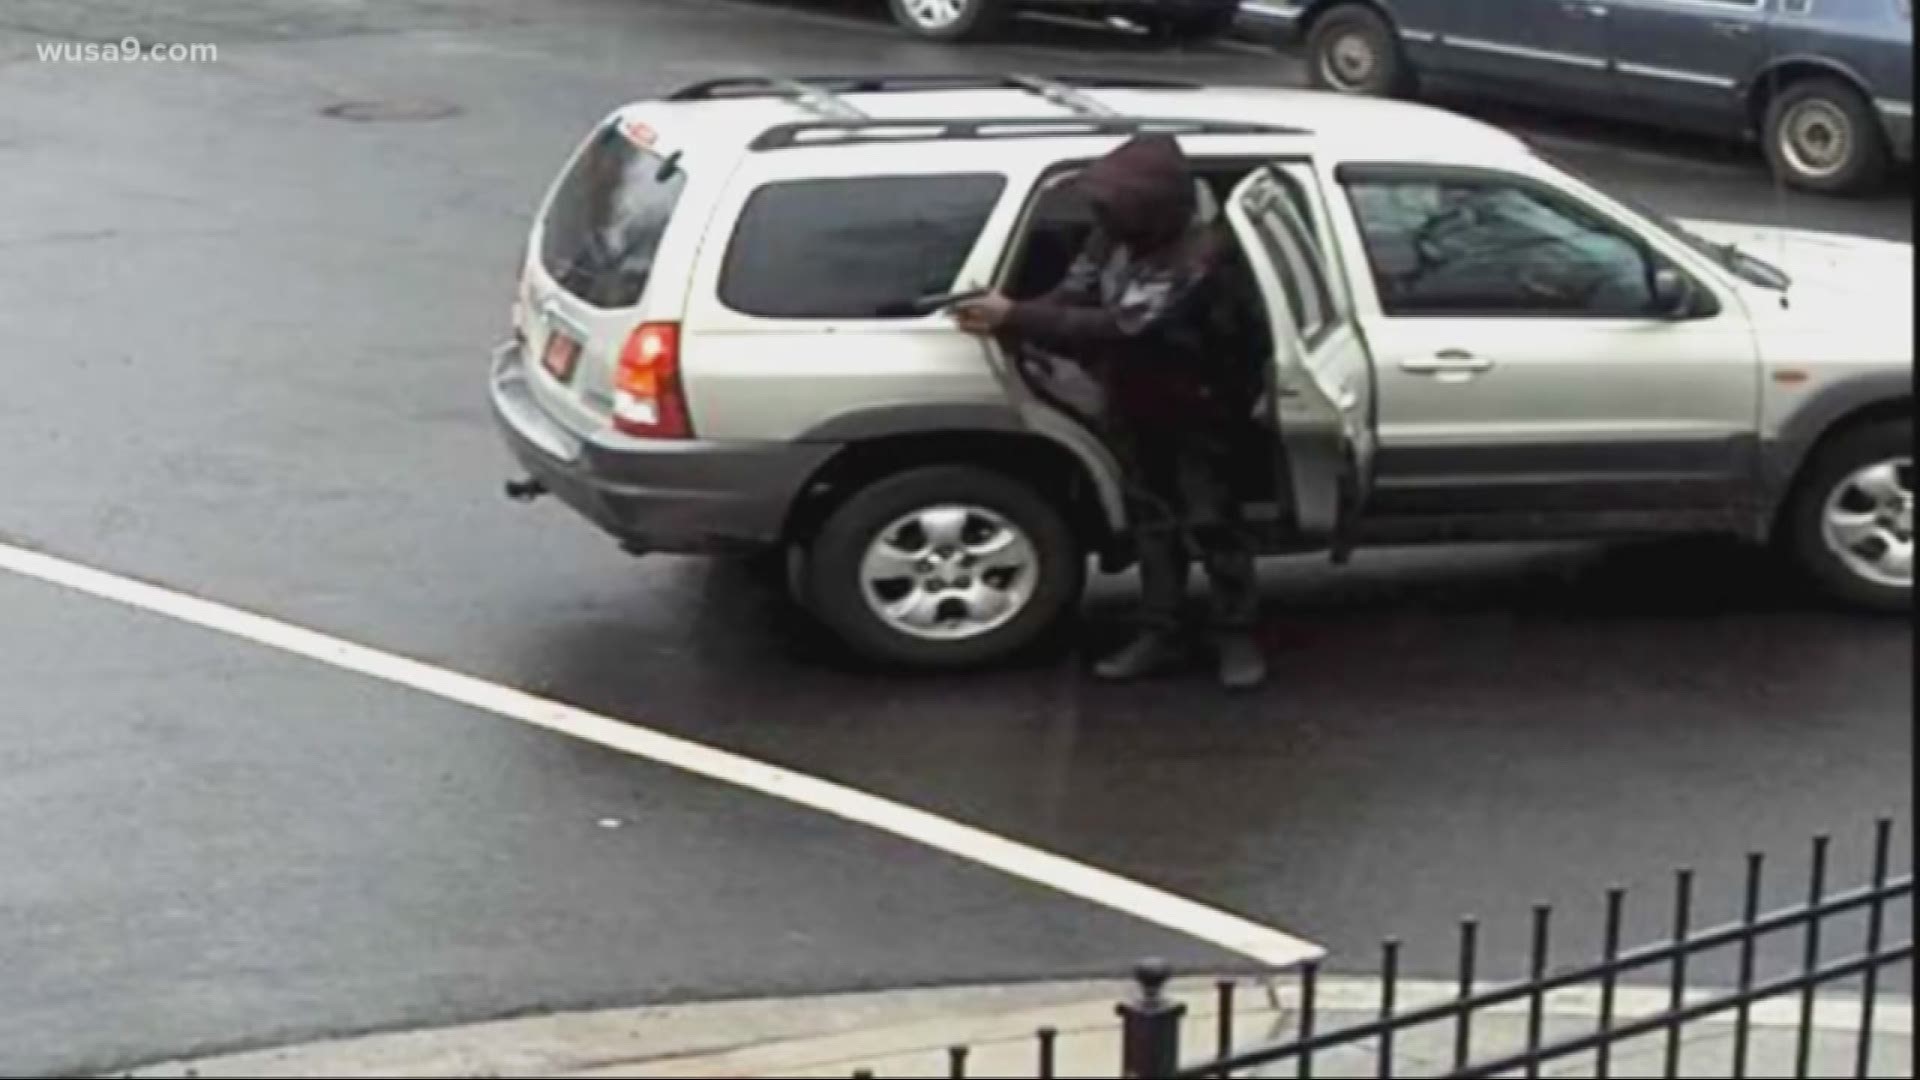 A man who shot two people in broad daylight over the weekend was caught on camera.